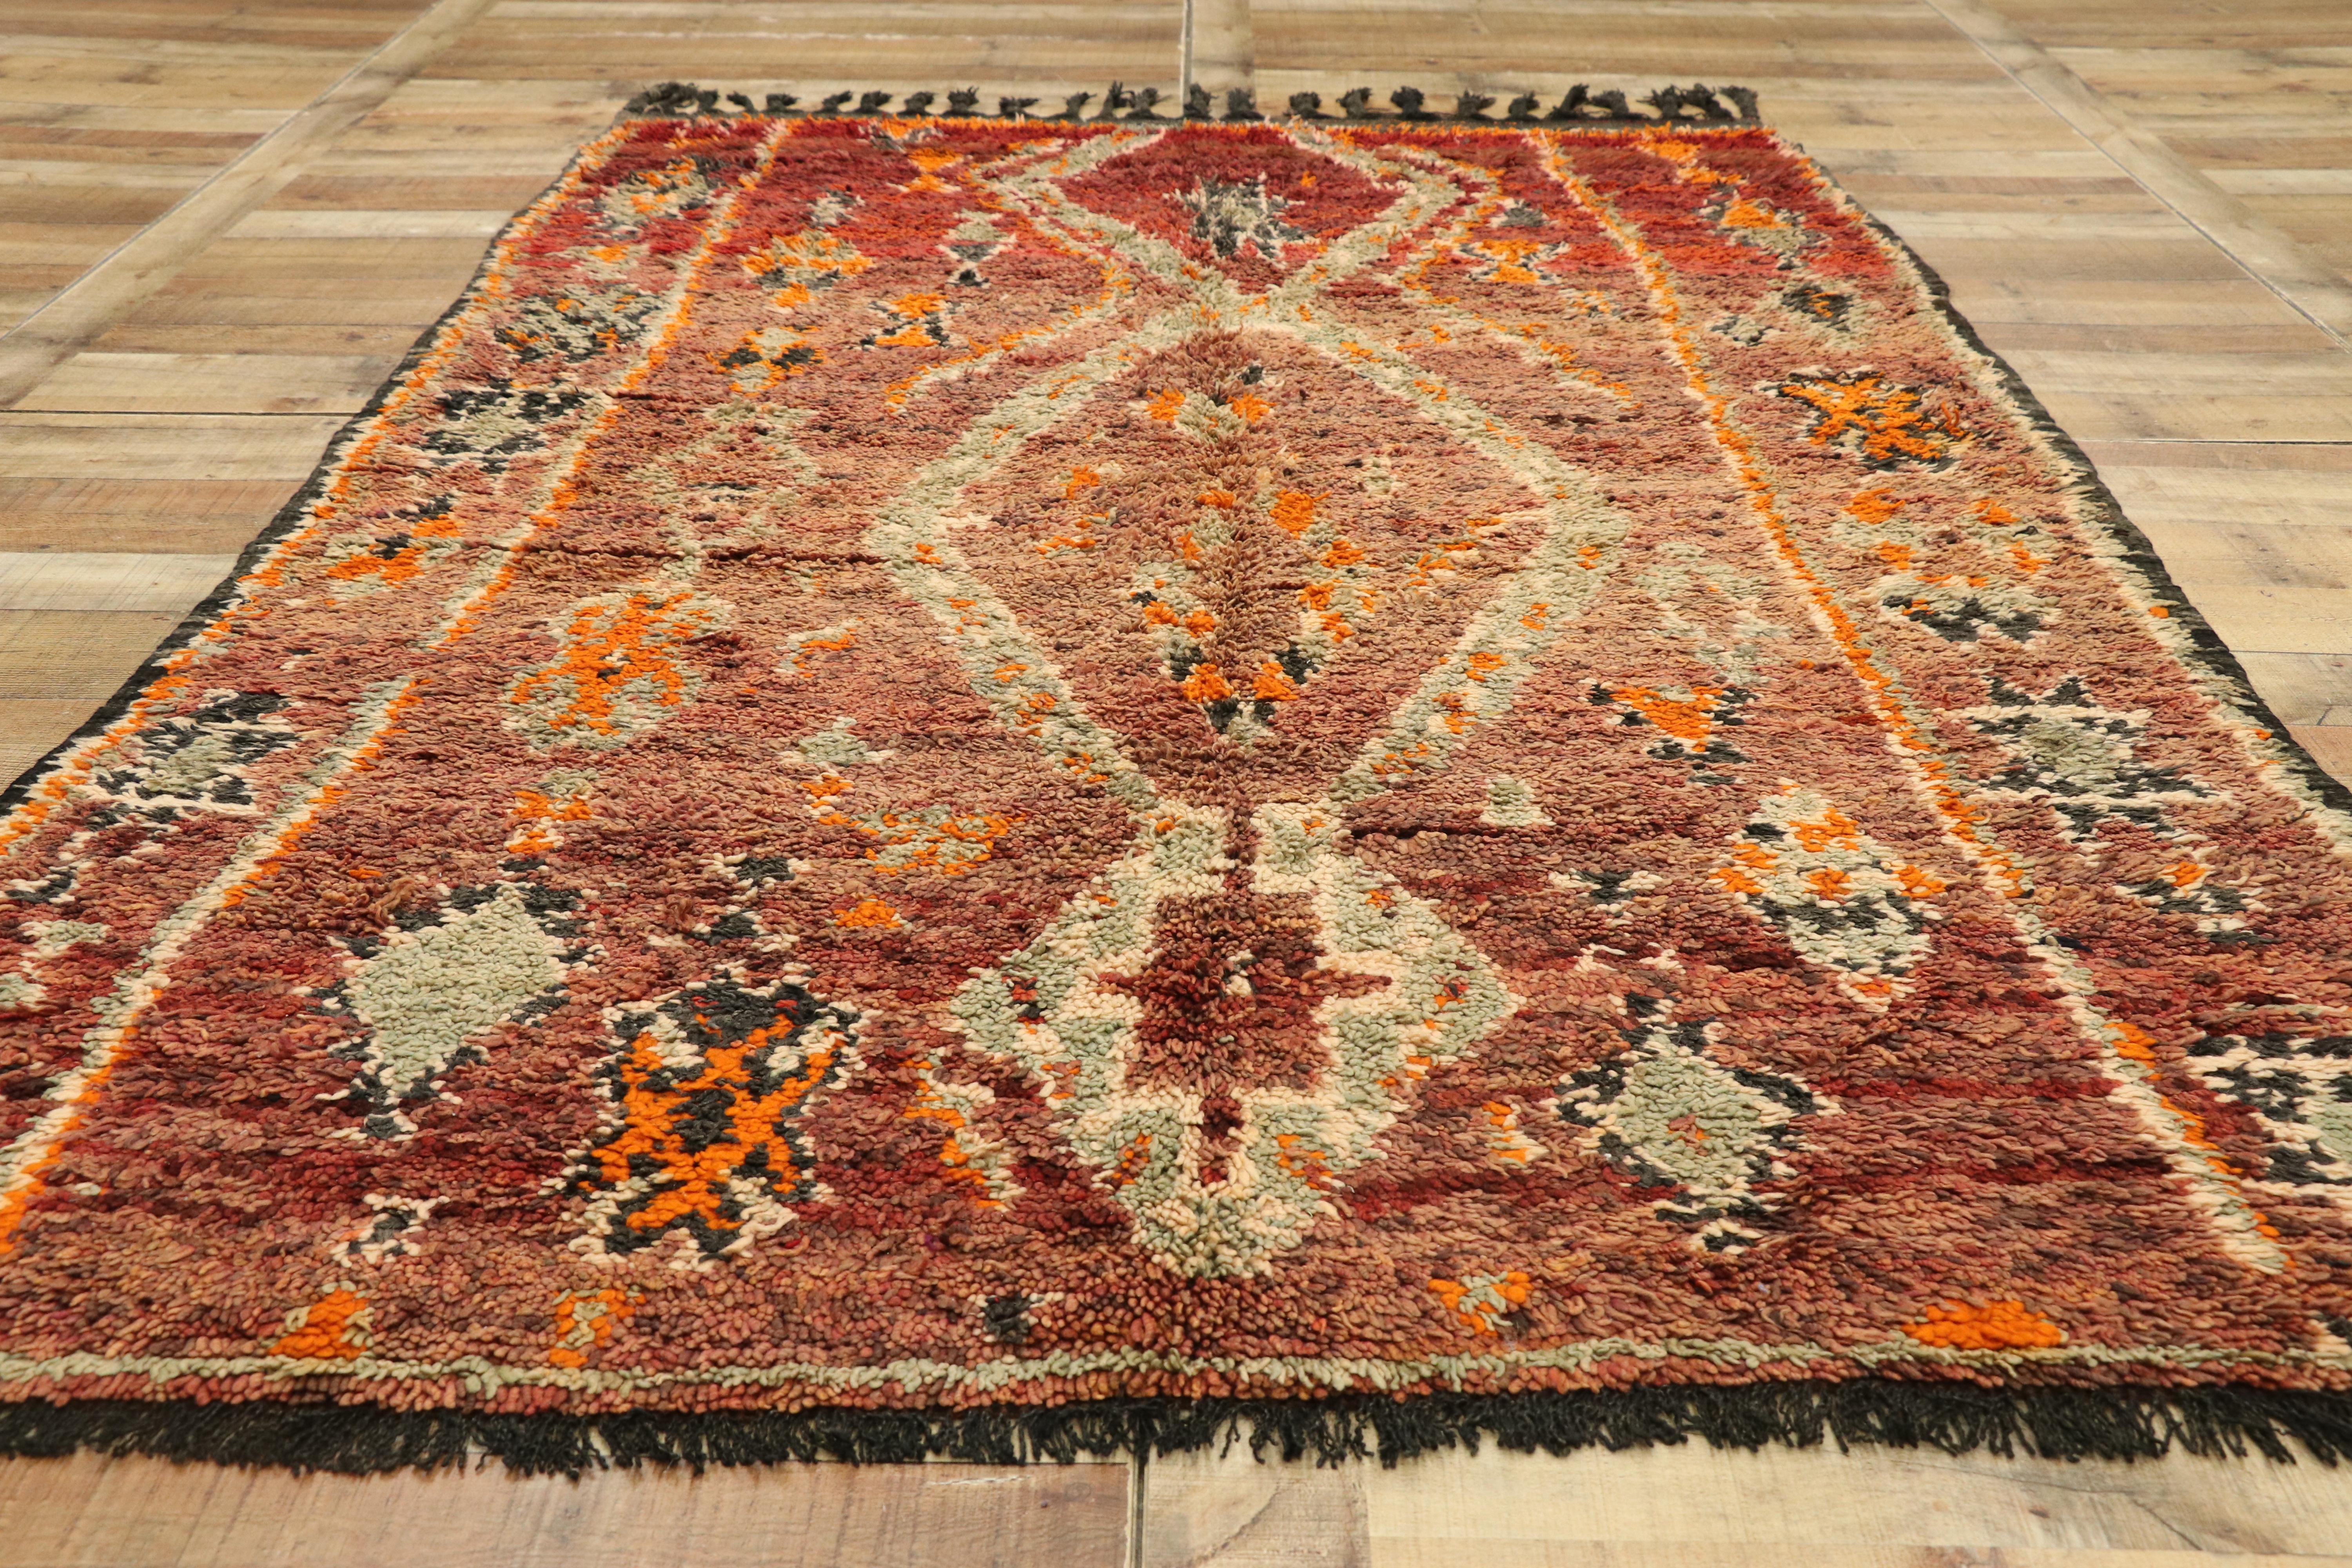 Wool Vintage Berber Moroccan Zayane Rug with Mid-Century Modern Style For Sale